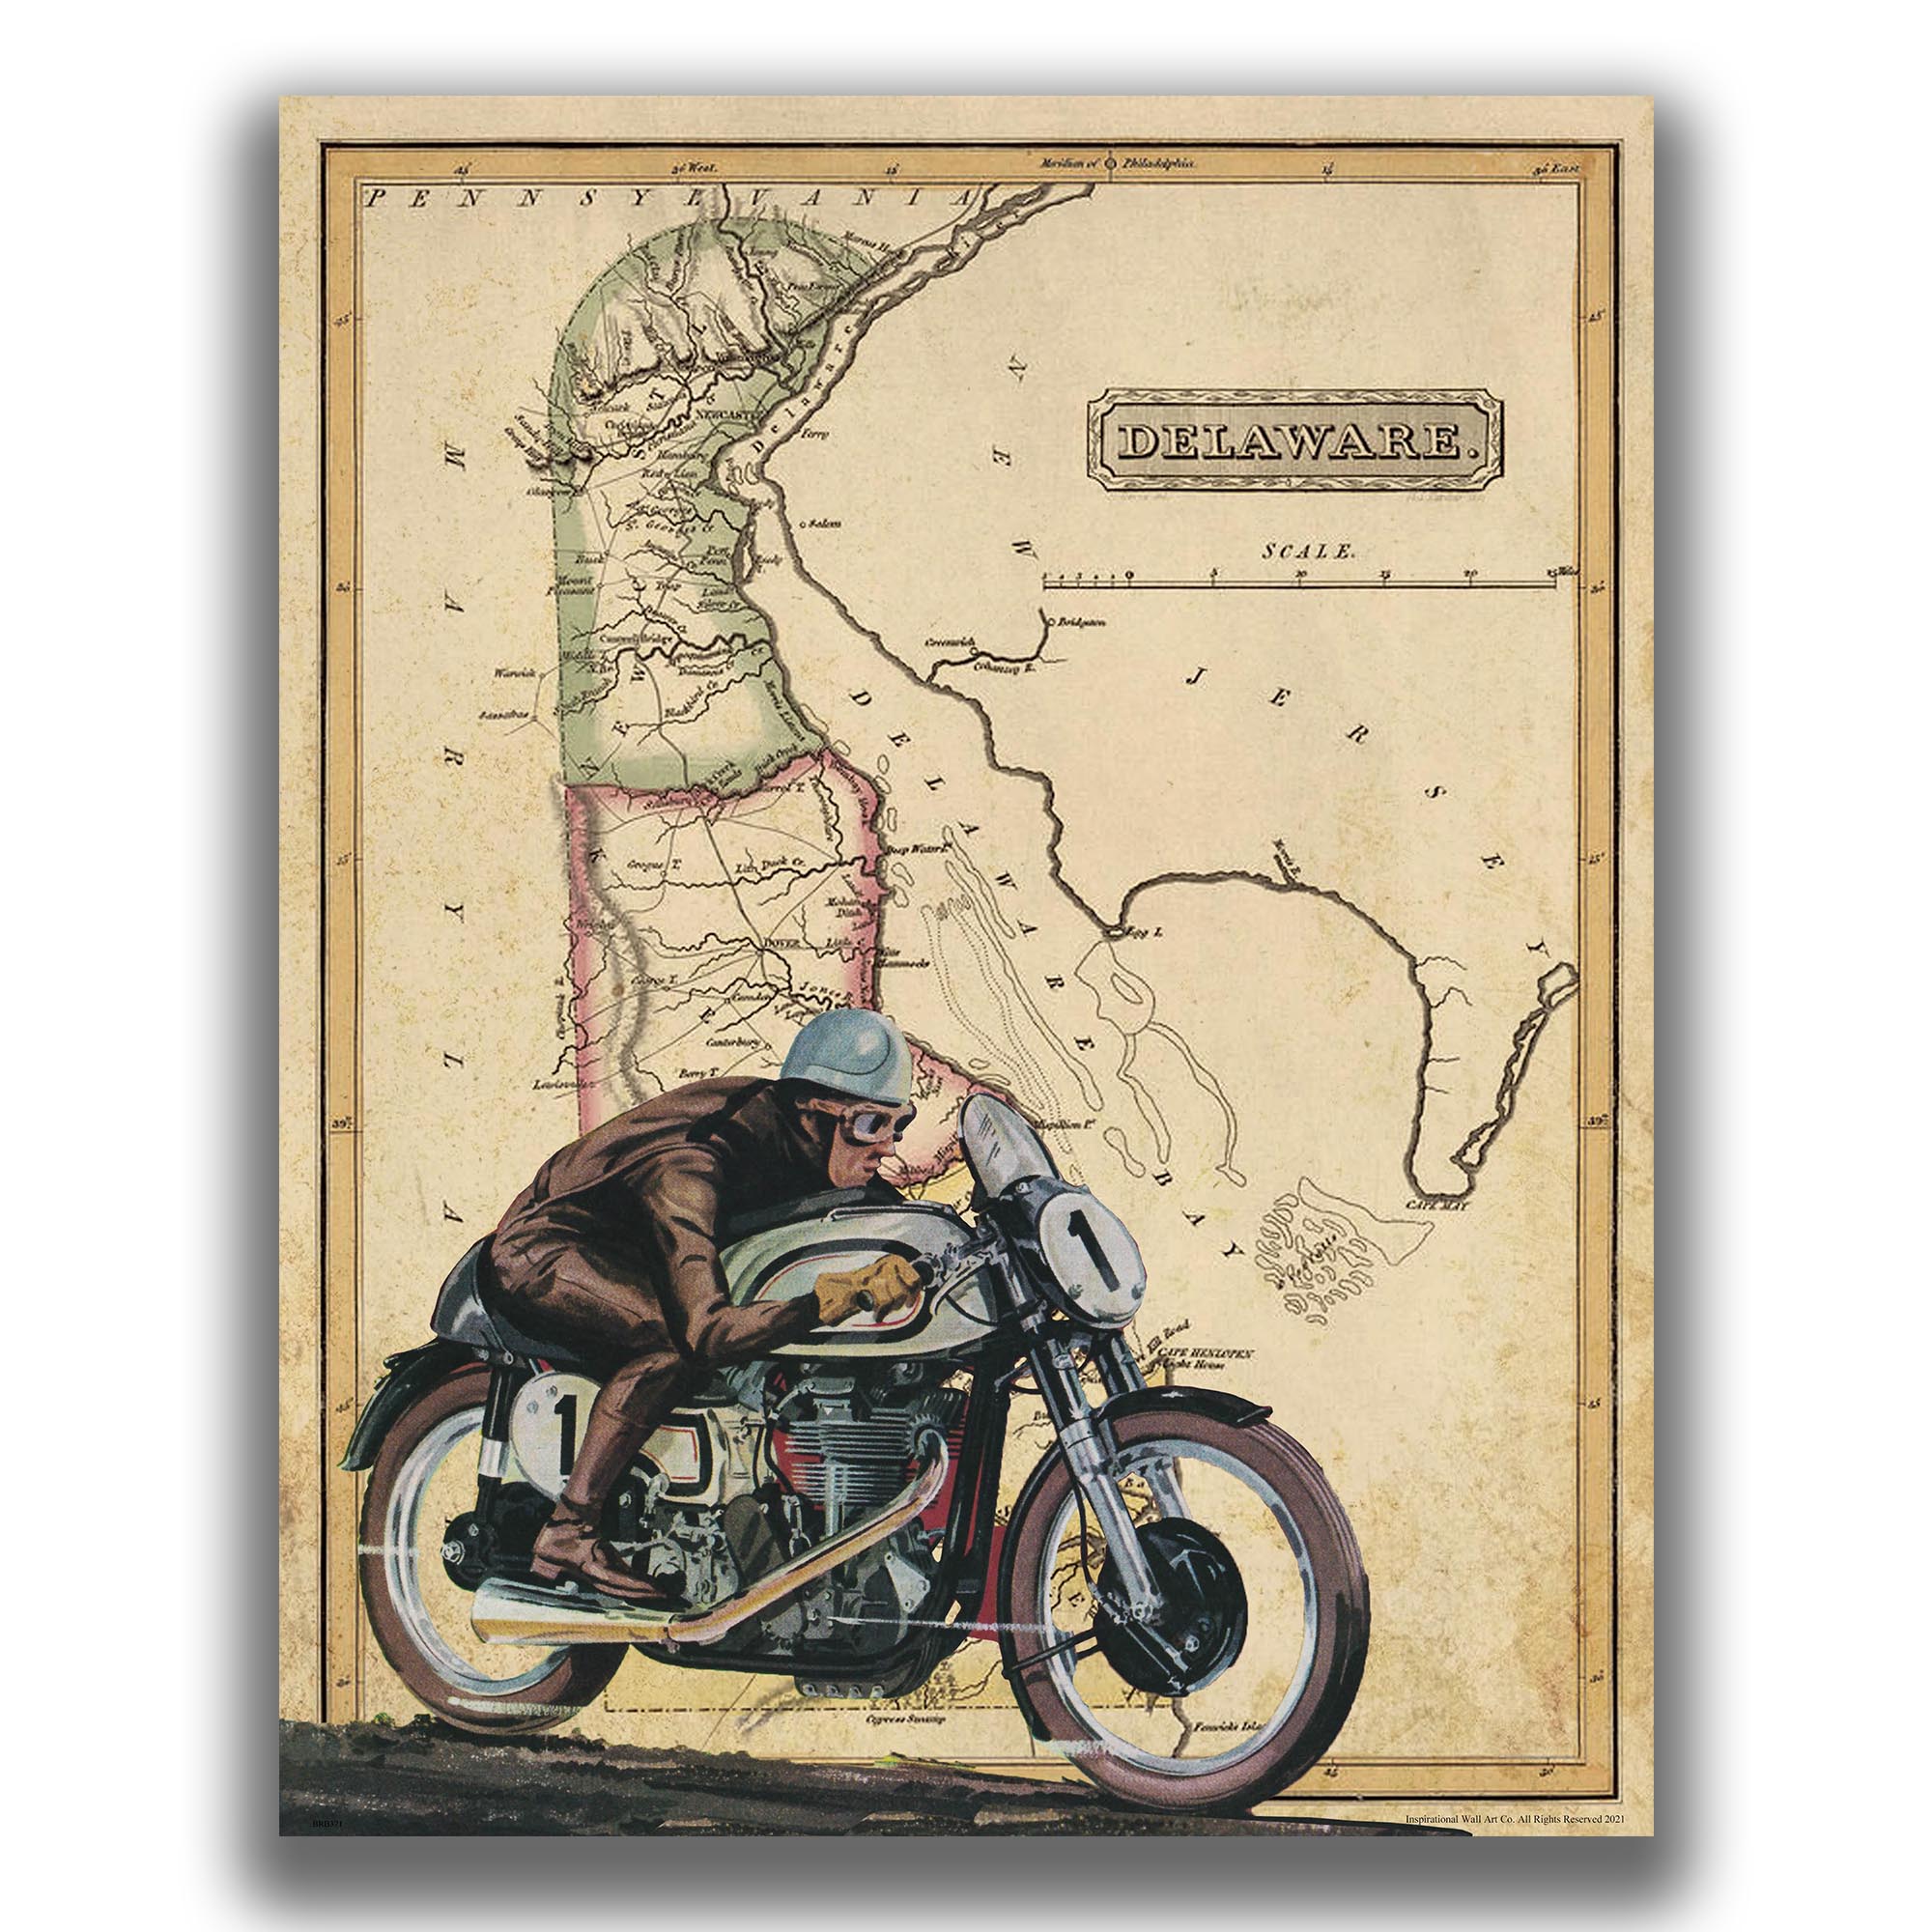 Delaware - Motorcycle Poster